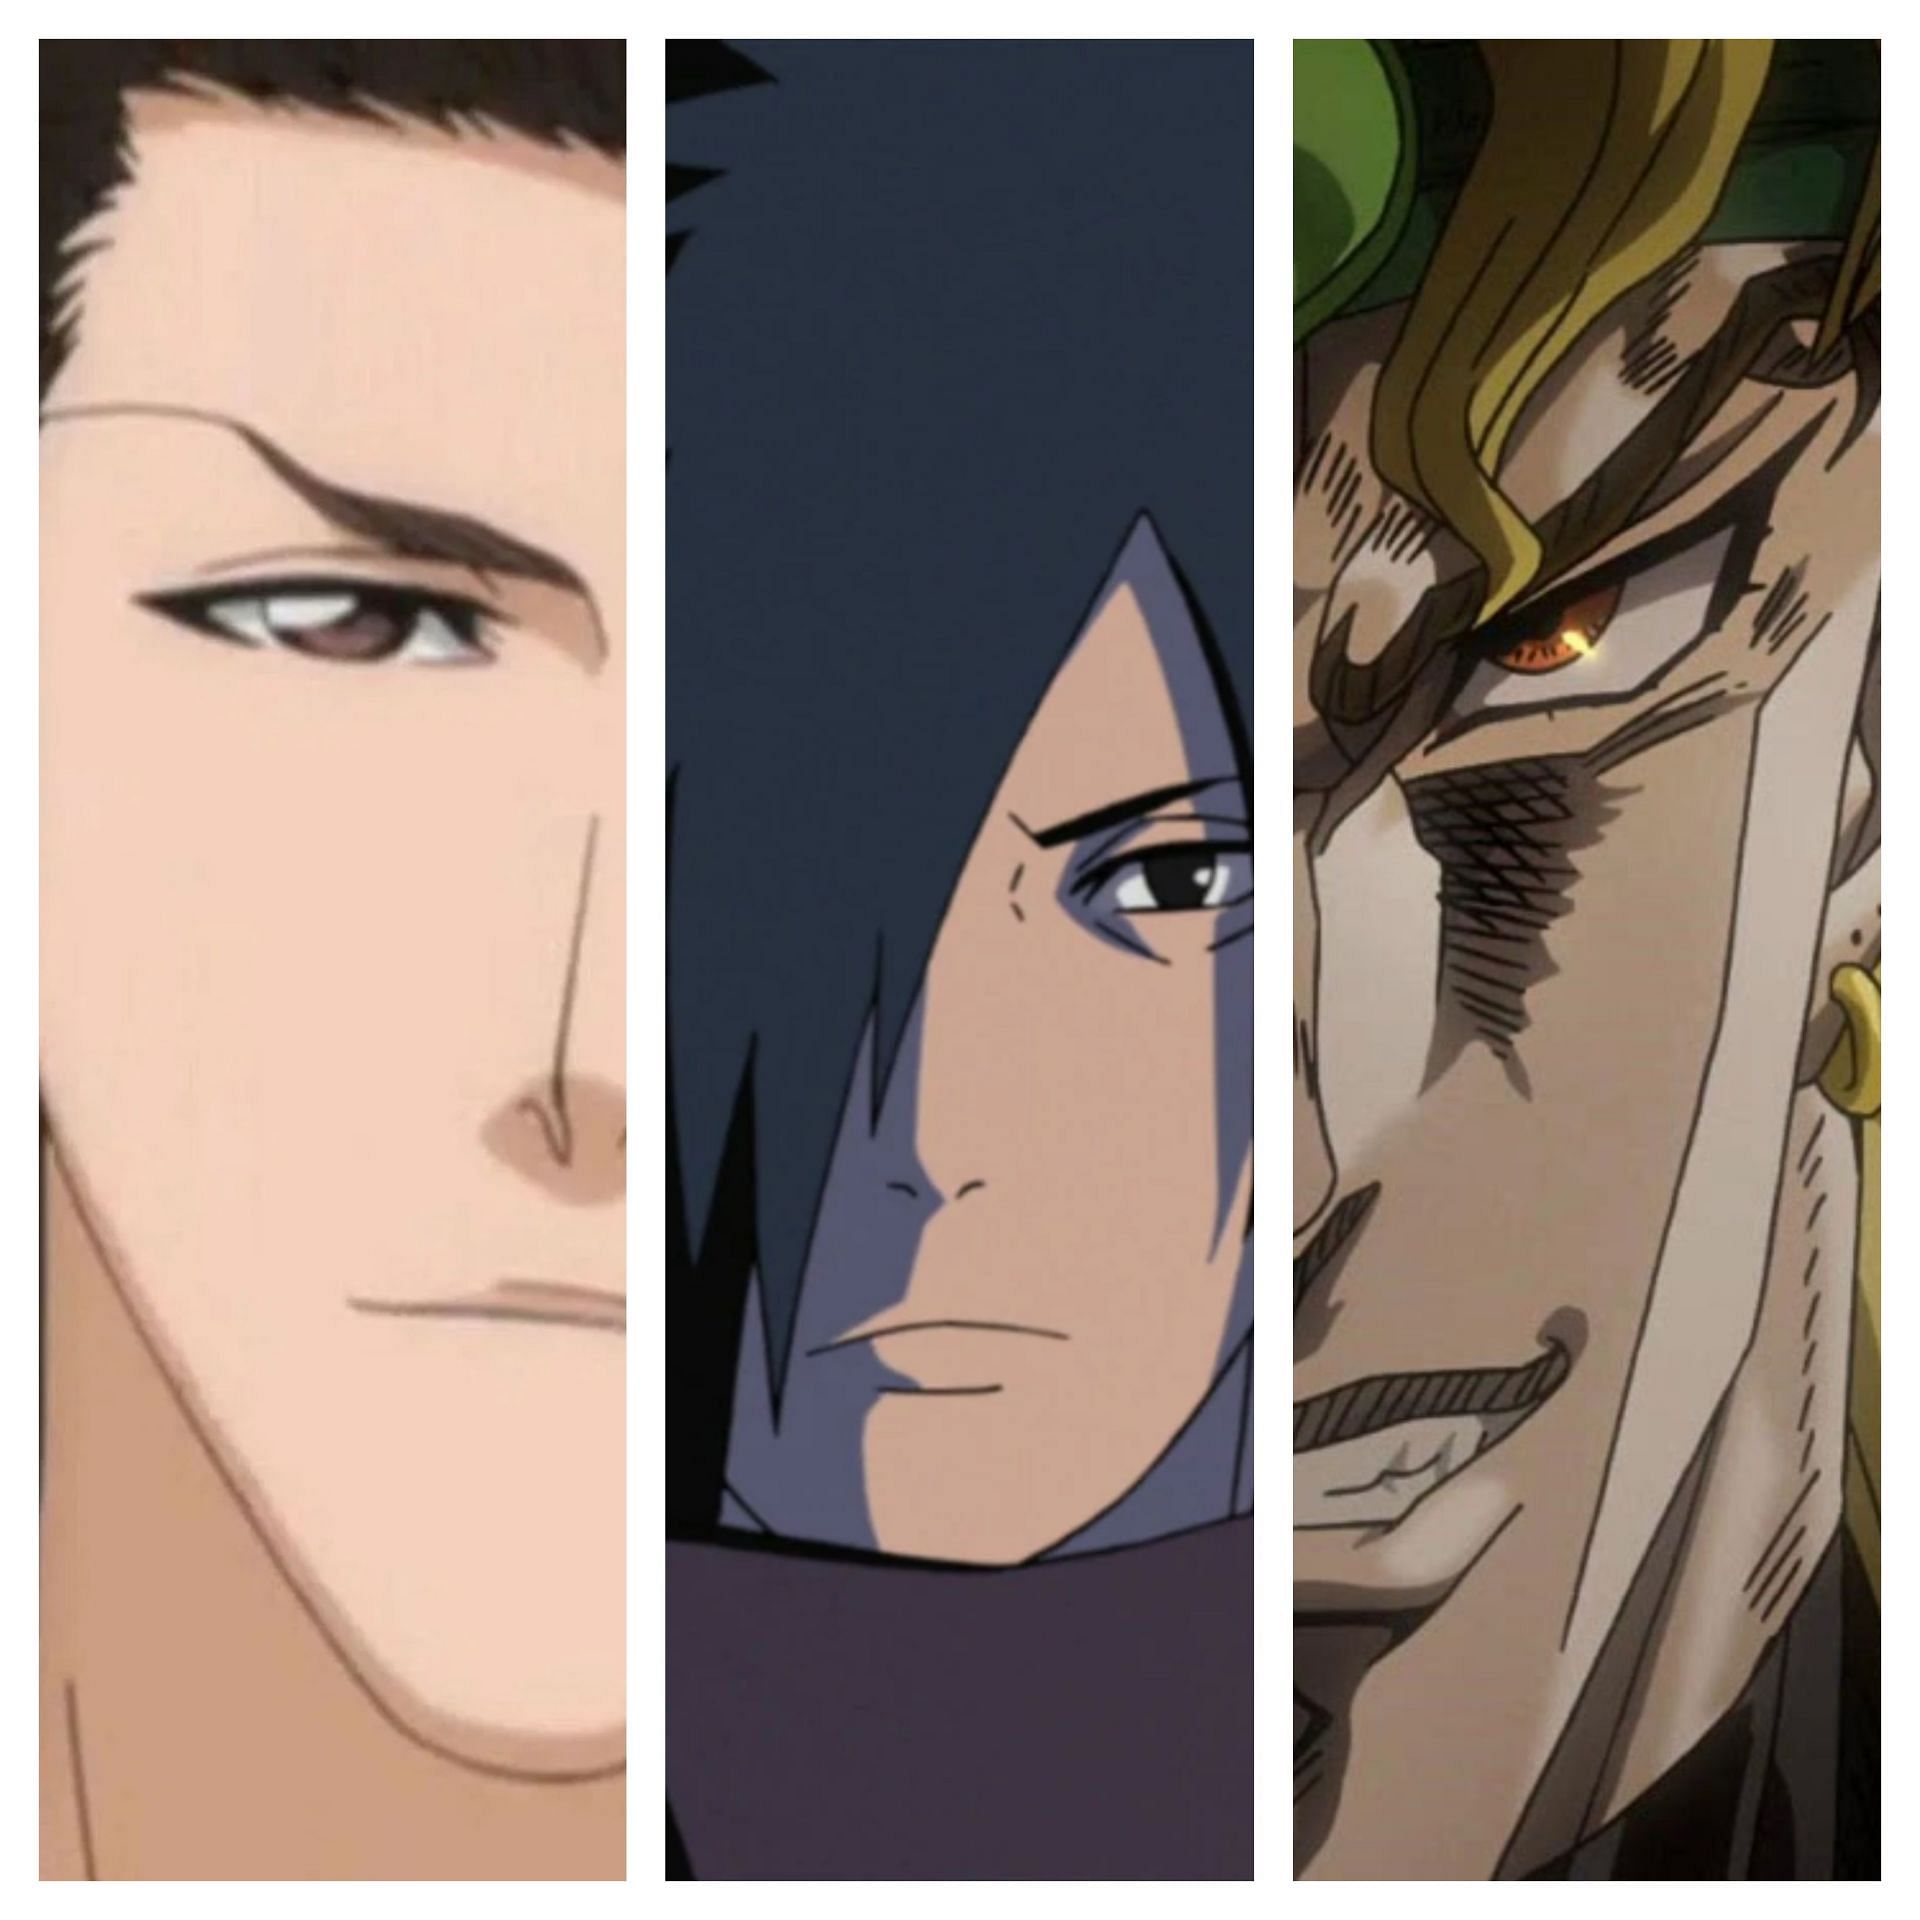 Create a Anime Antagonist Tier List - TierMaker